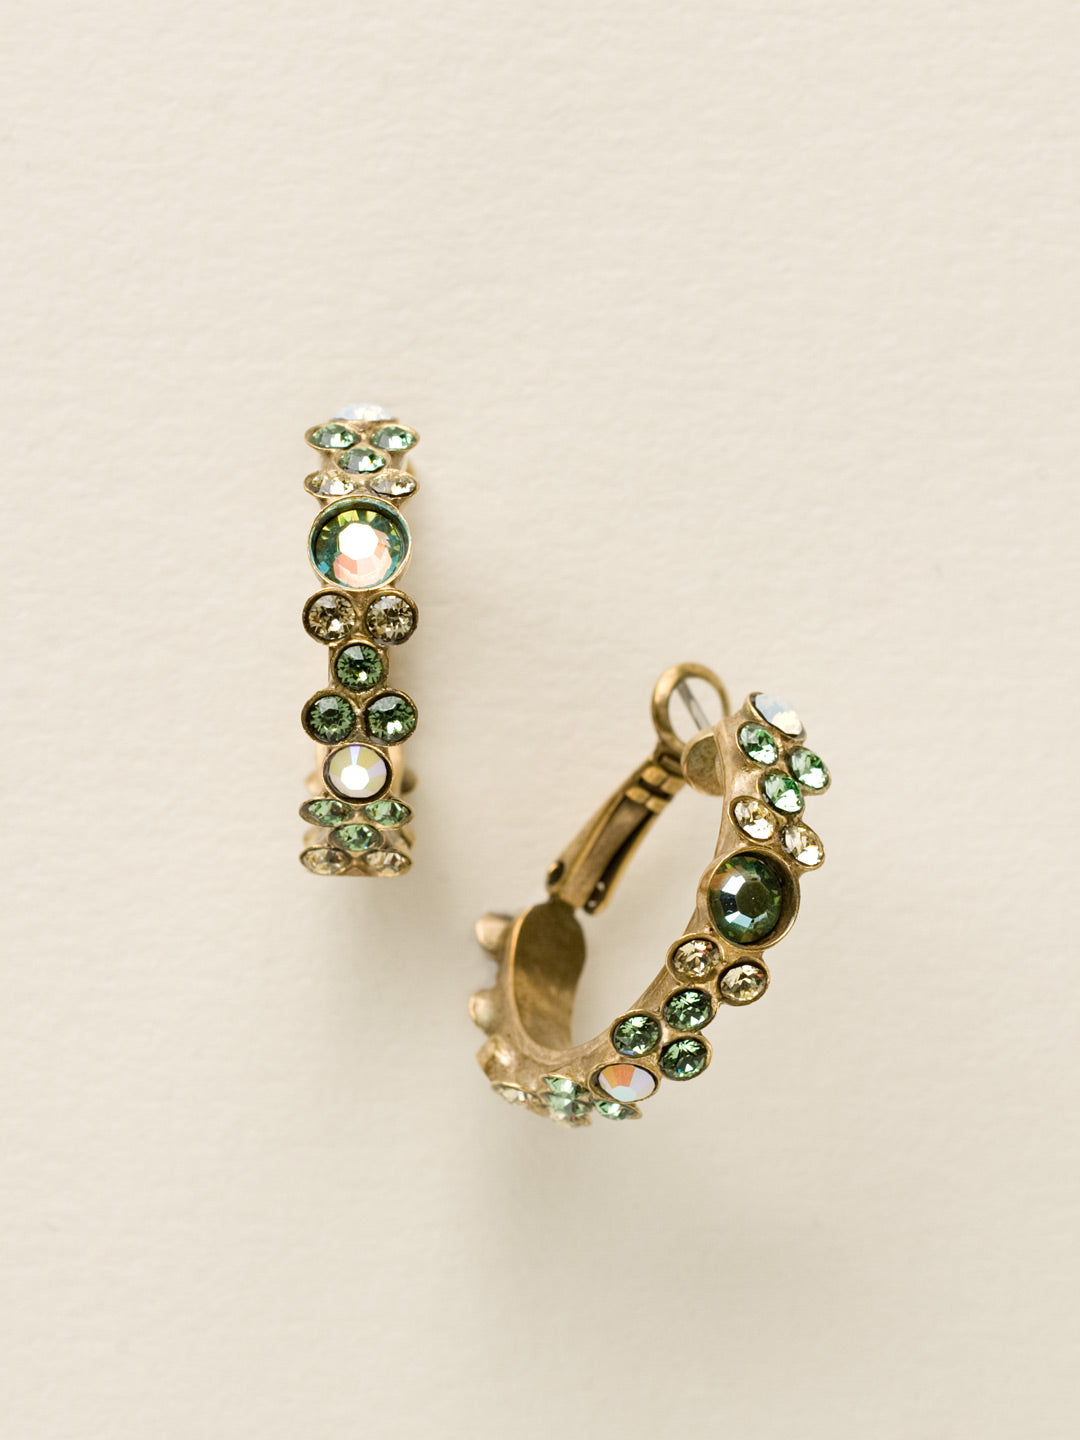 Floral Hoop Earrings - EBP15AGGA - <p>Intricate design, infused with gorgeous shine. A motif of floral clusters is featured here on a small, delicate hoop with a hinged post backing. From Sorrelli's Green Apple collection in our Antique Gold-tone finish.</p>